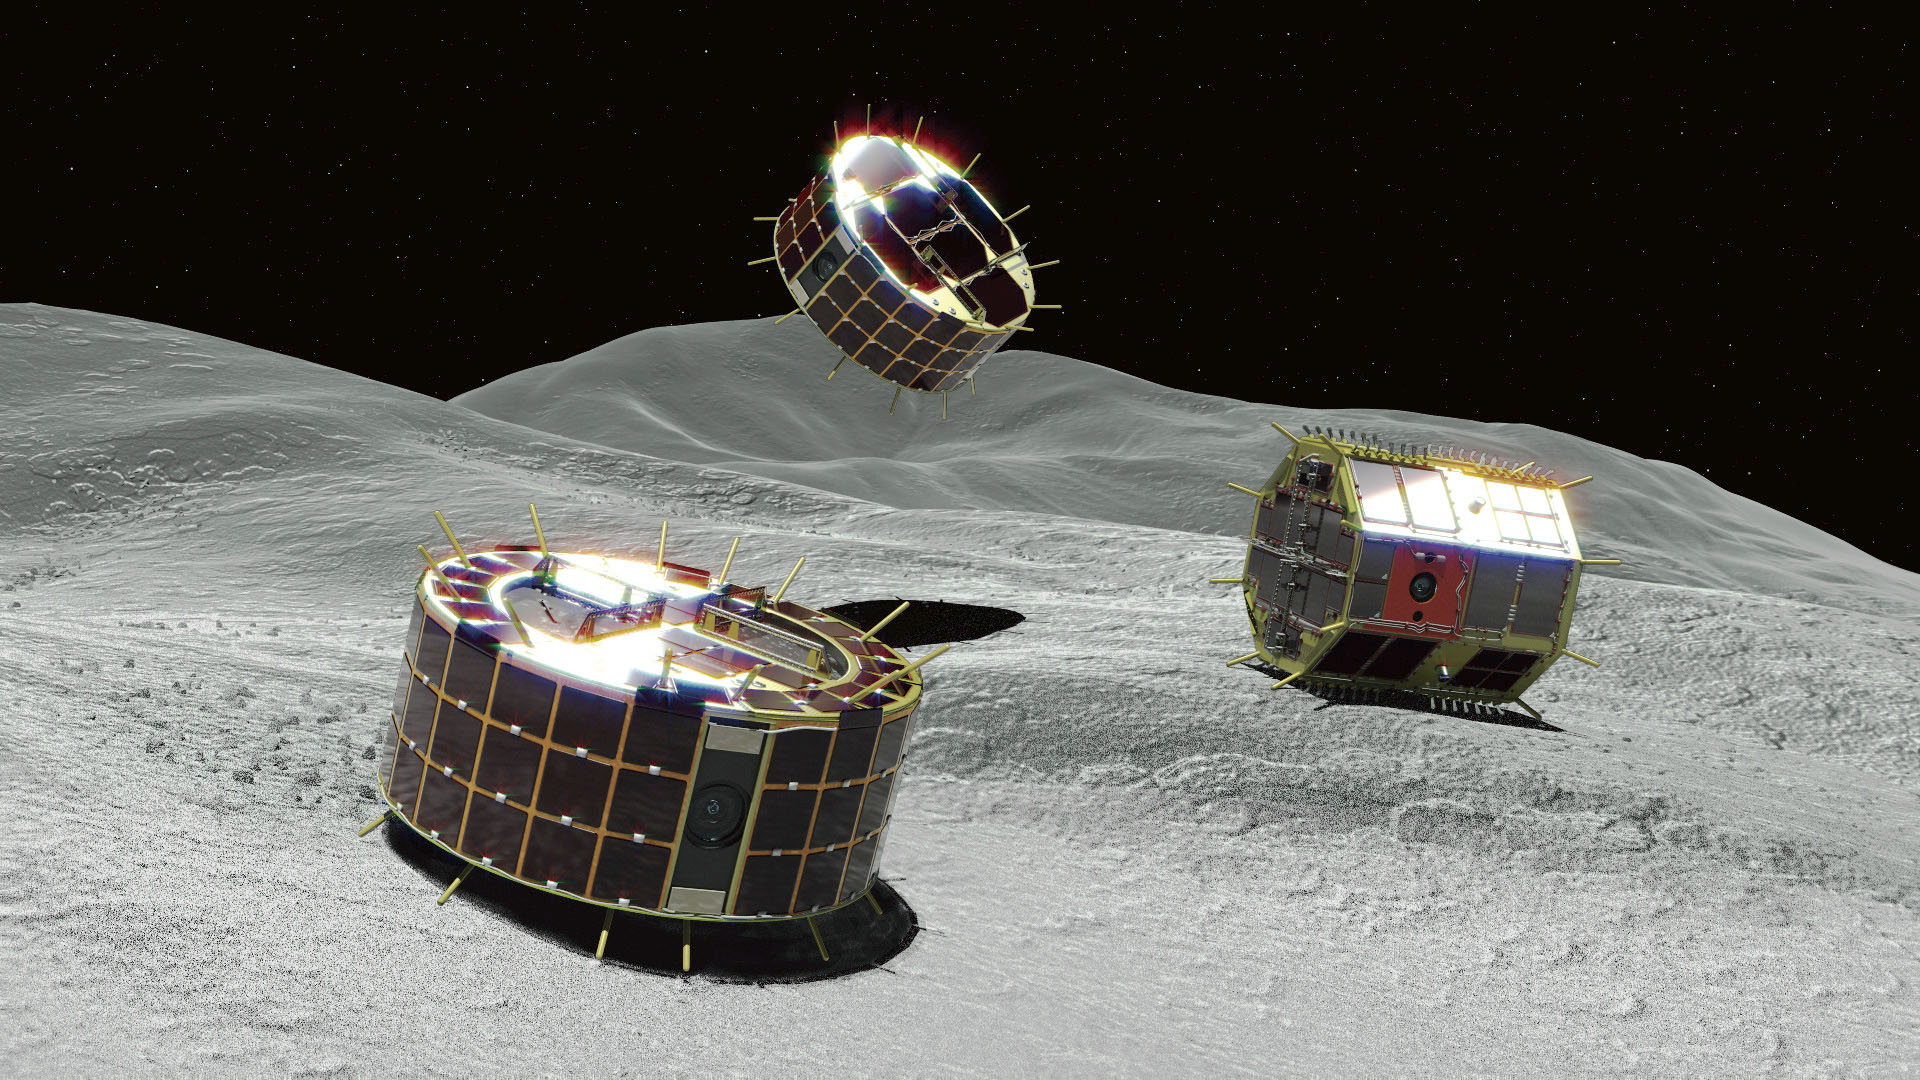 Japan Makes History: Hayabusa2 Spacecraft Lands Rovers on Moving Asteroid